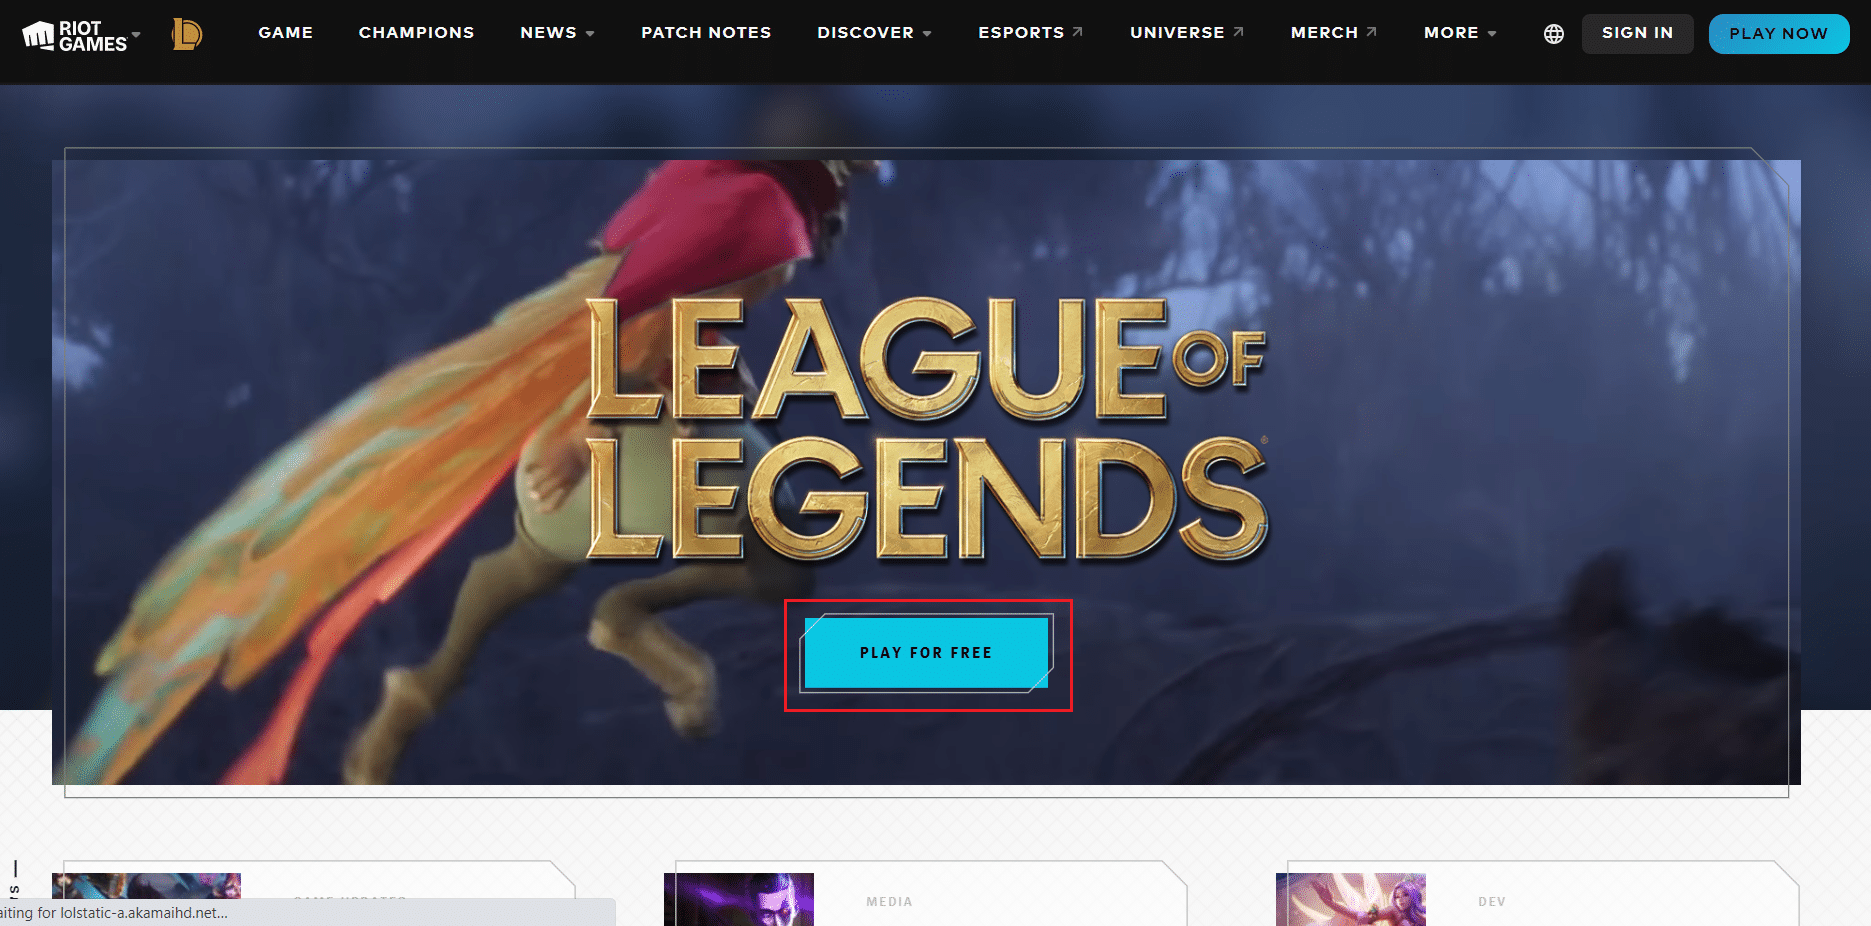 click on play for free option in league of legends download page. Fix League of Legends Directx Error in Windows 10